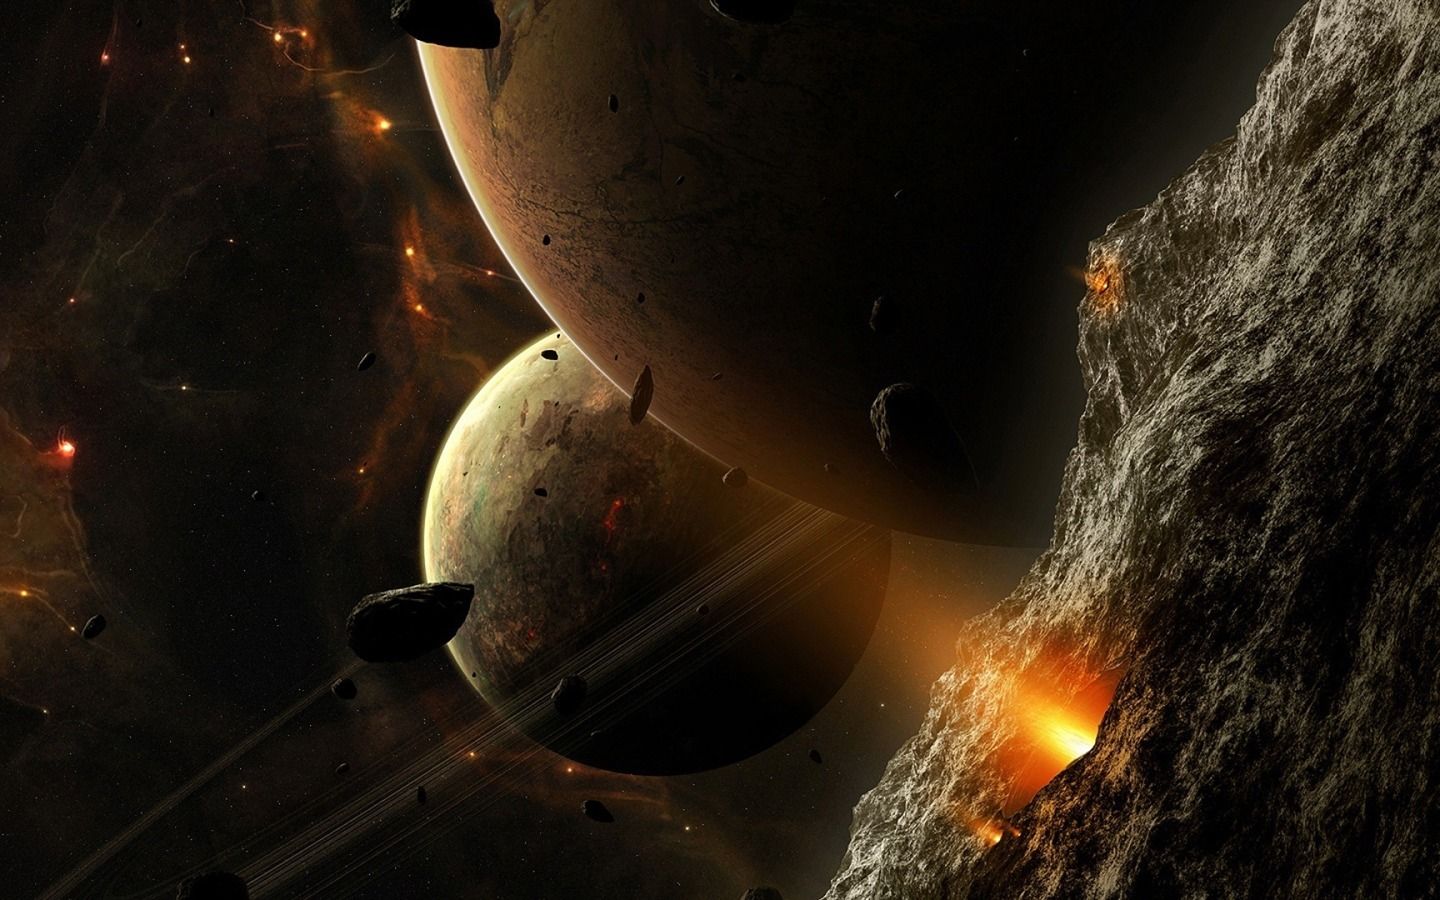 Space wallpaper - Asteroids, comets and a planet - 1440x900